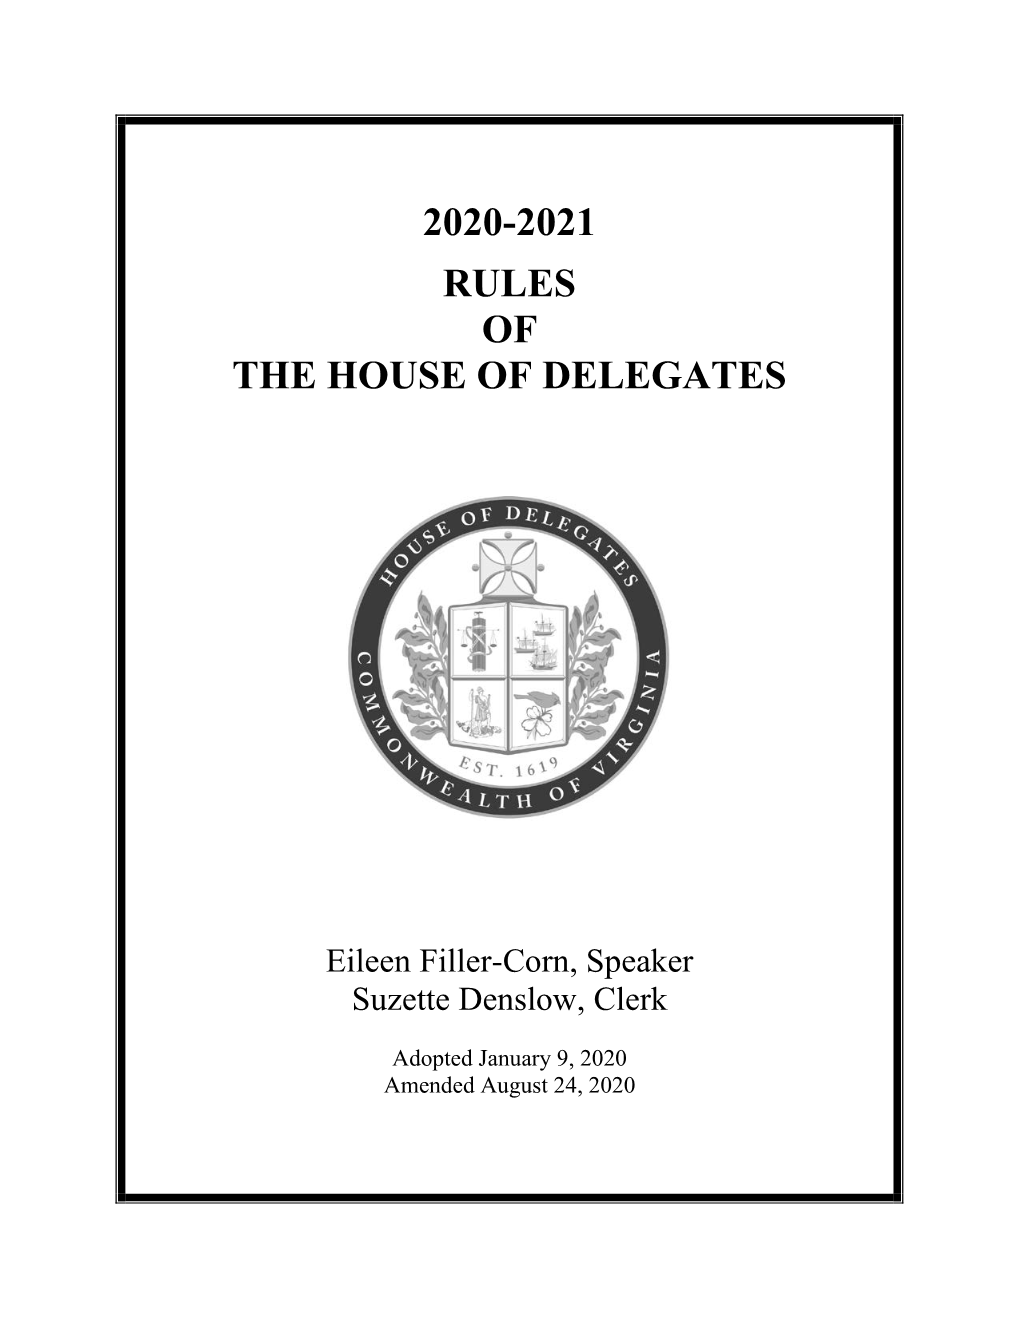 2020-2021 RULES of the HOUSE of DELEGATES Adopted January 9, 2020 Amended August 24, 2020 I